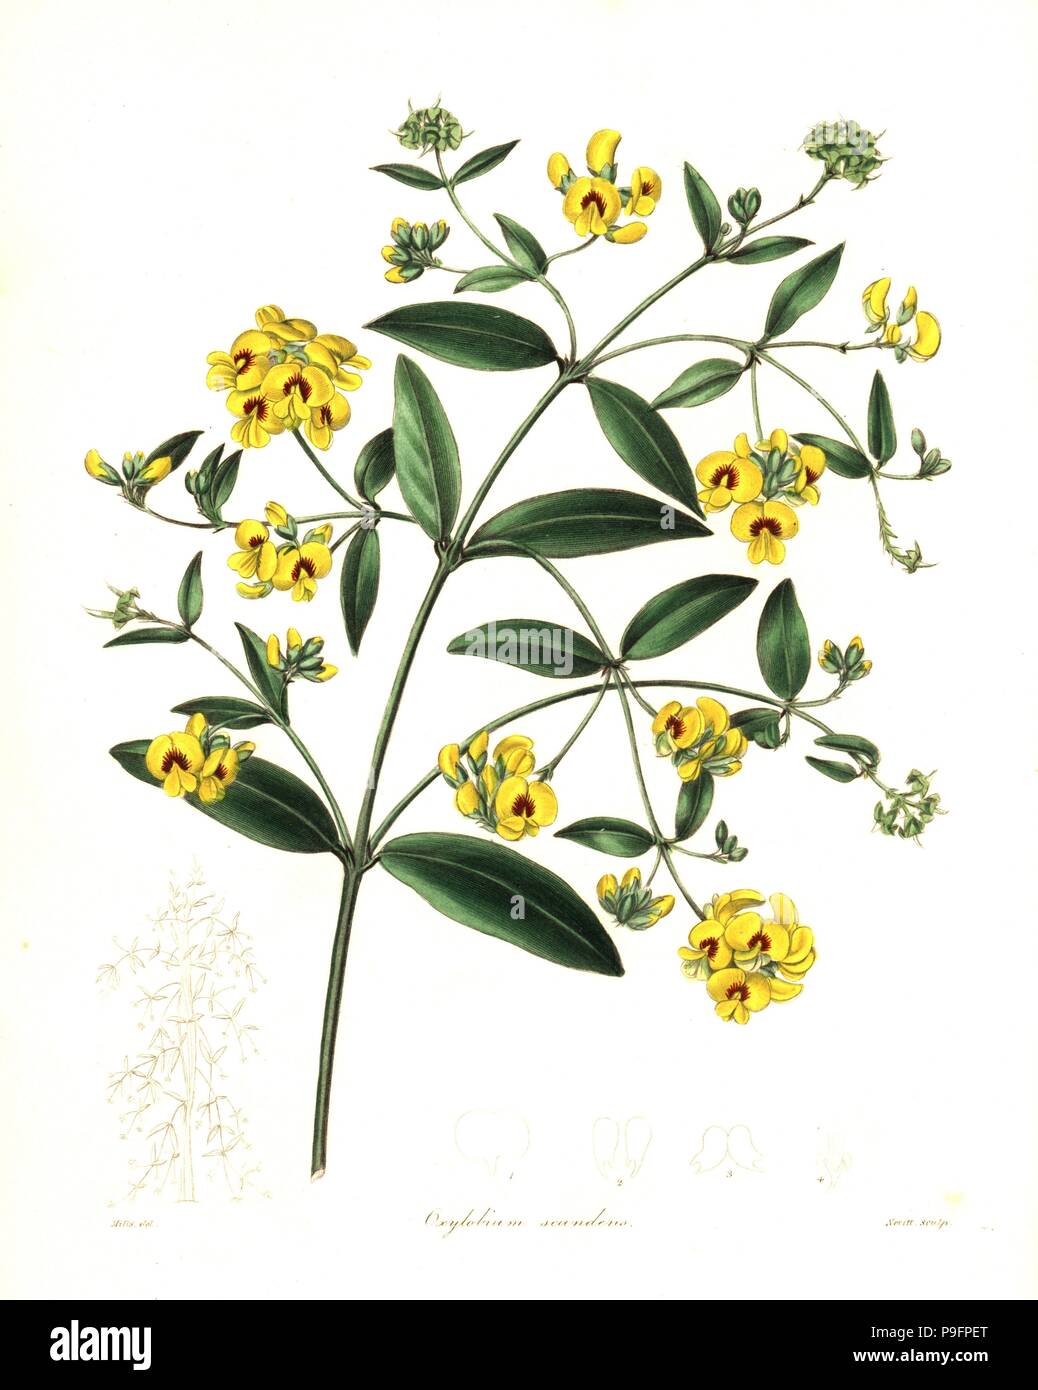 Tree shaggy pea or climbing oxylobium, Oxylobium scandens. Handcoloured copperplate engraving by S. Nevitt after a botanical illustration by Mills from Benjamin Maund and the Rev. John Stevens Henslow's The Botanist, London, 1836. Stock Photo